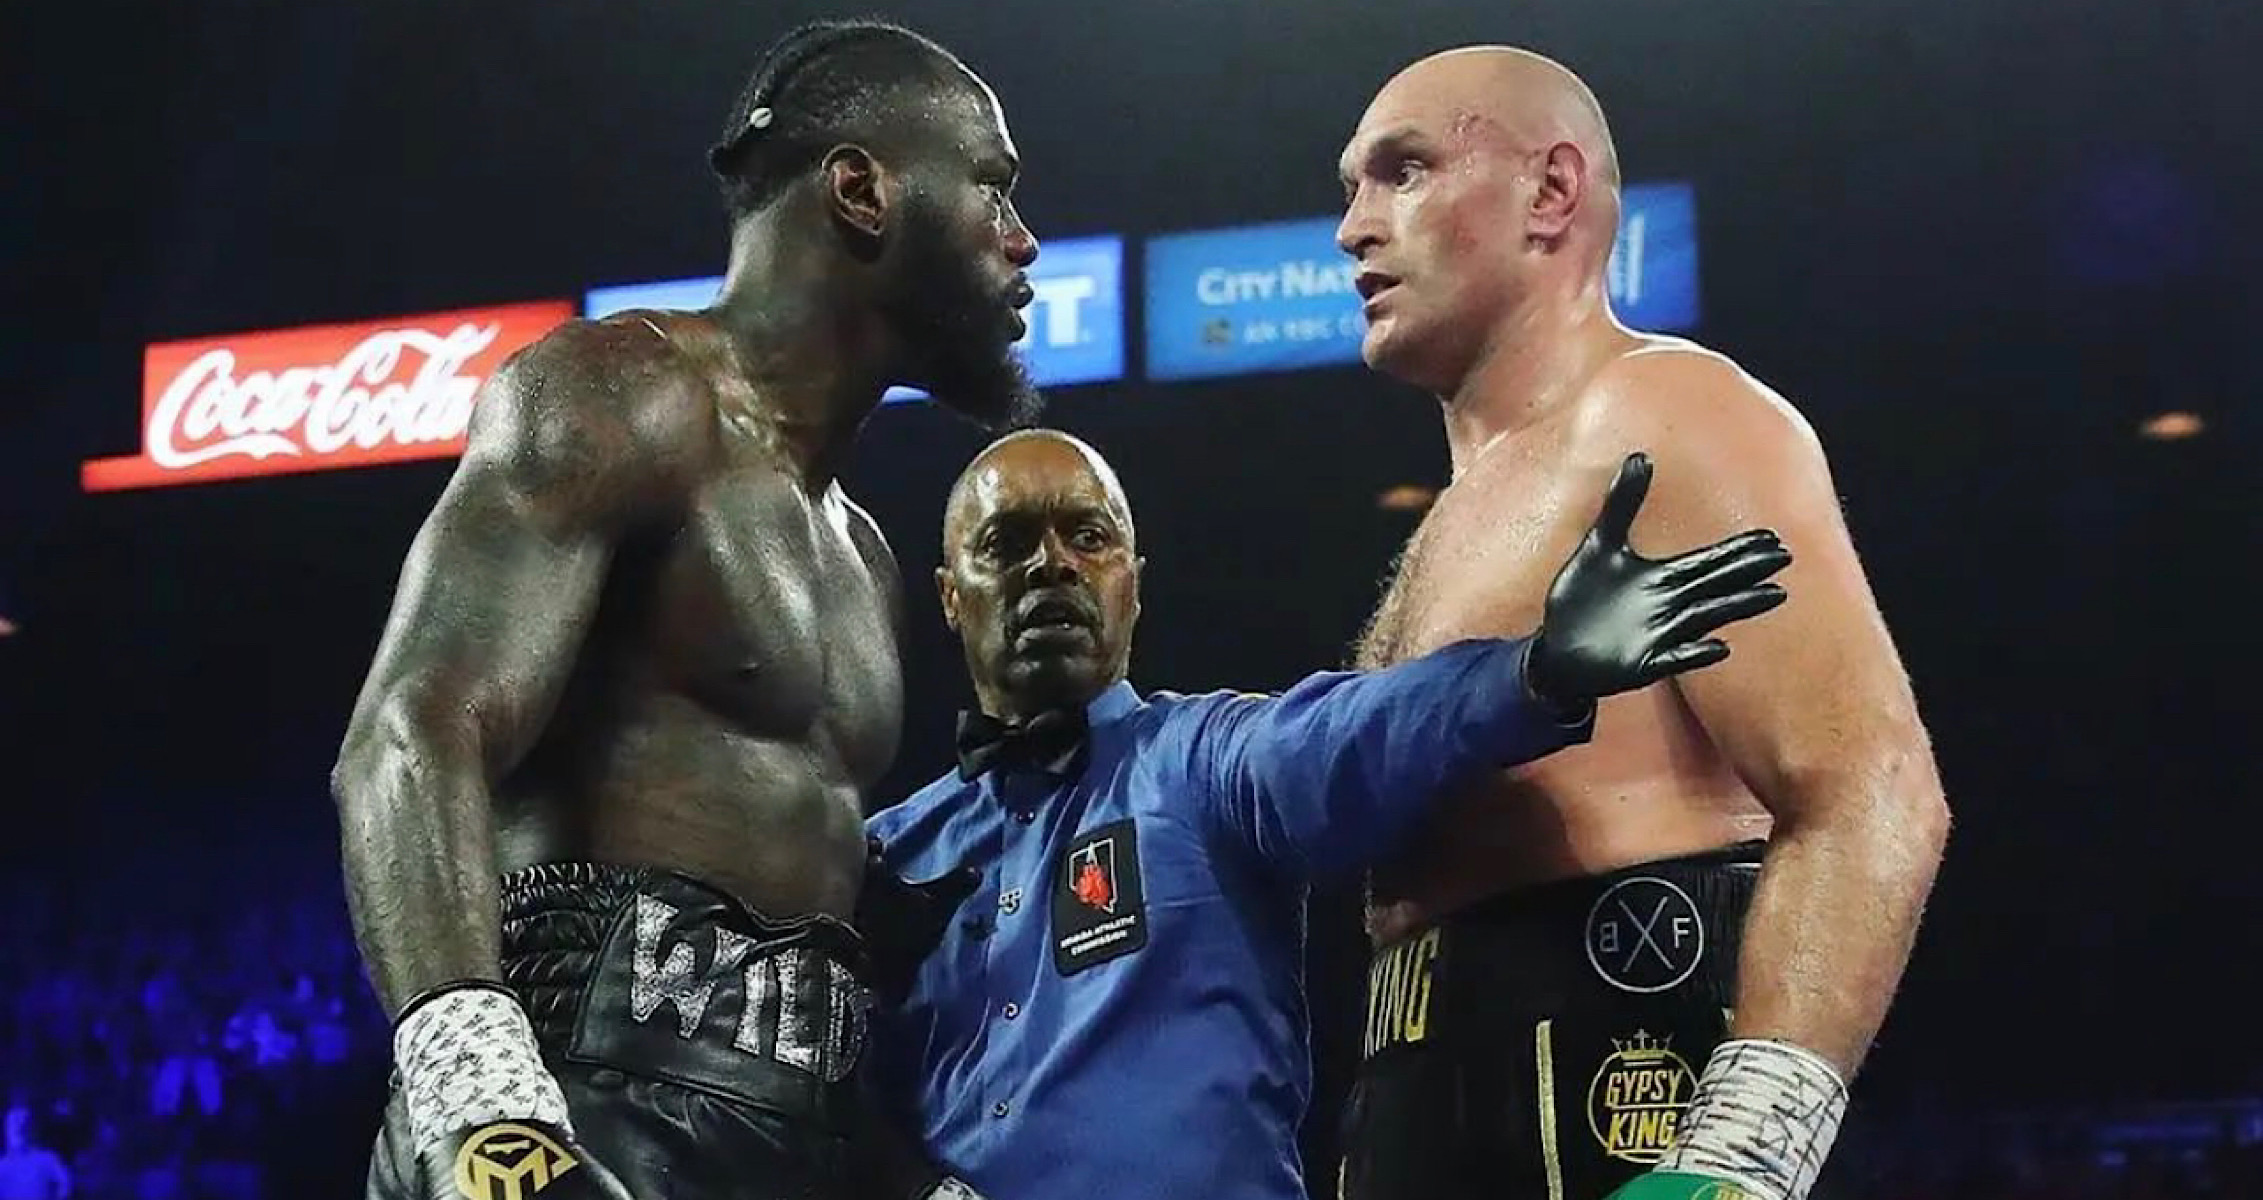 Tyson Fury vs Deontay Wilder 3: What Each Man Must Do To Win